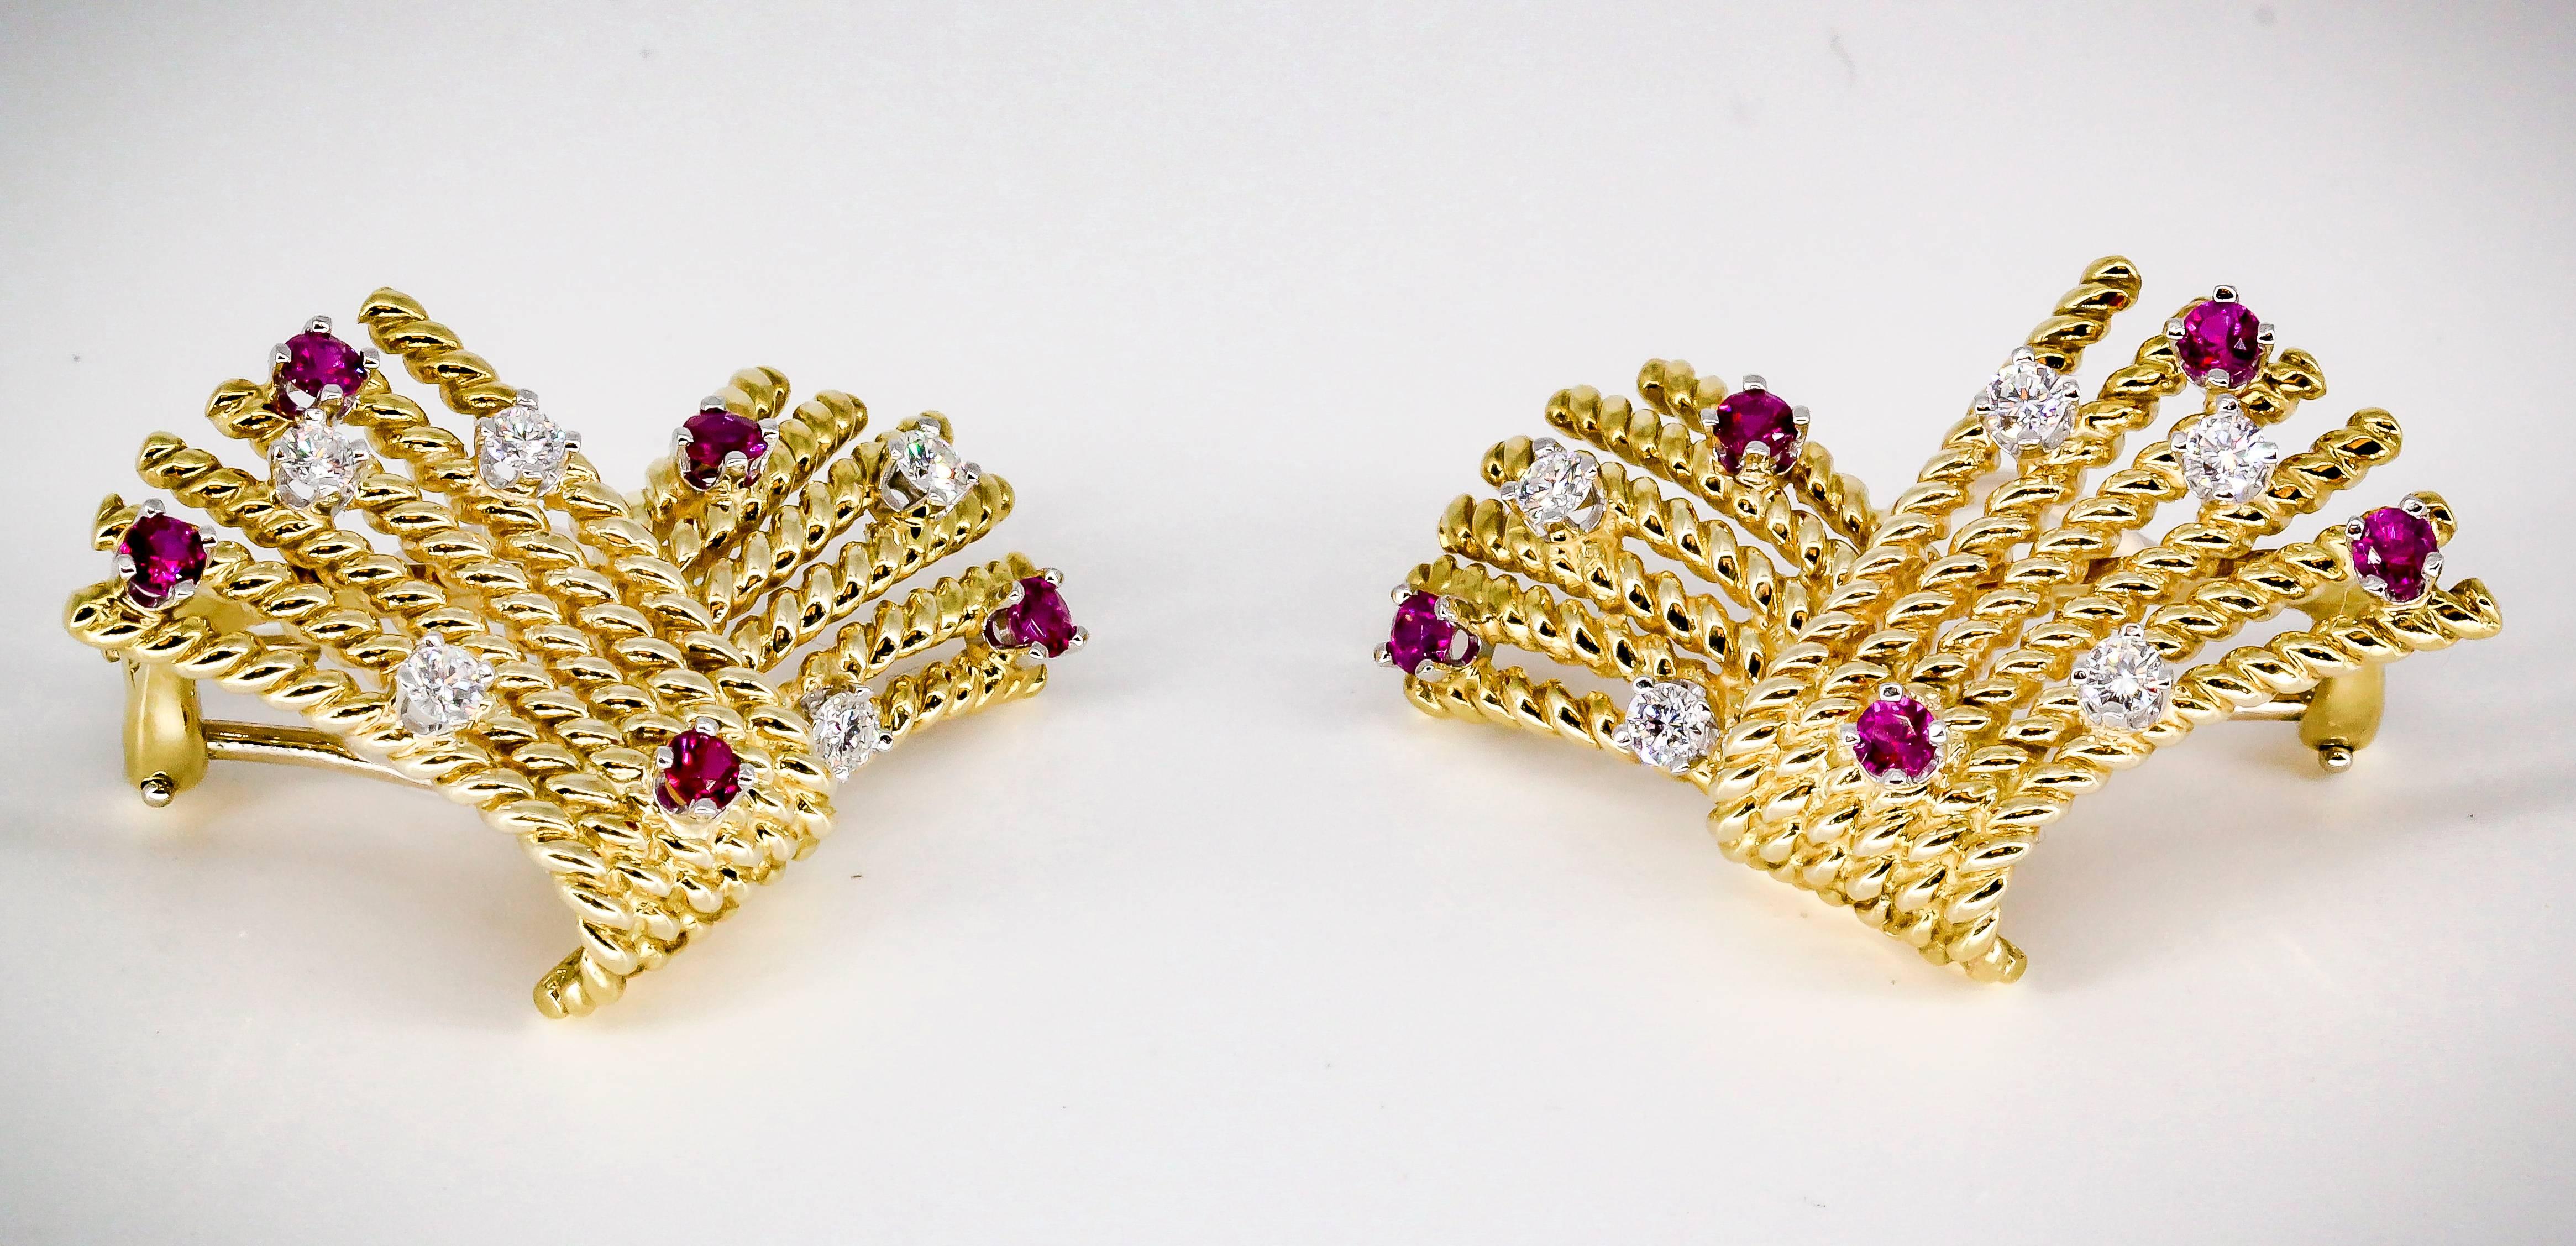 Classic ruby, diamond and 18K yellow gold earrings from the "V Rope" collection by Tiffany & Co. Schlumberger. They feature high grade round brilliant cut diamonds and rich red rubies.

Hallmarks: Tiffany & Co., Schlumberger, 750